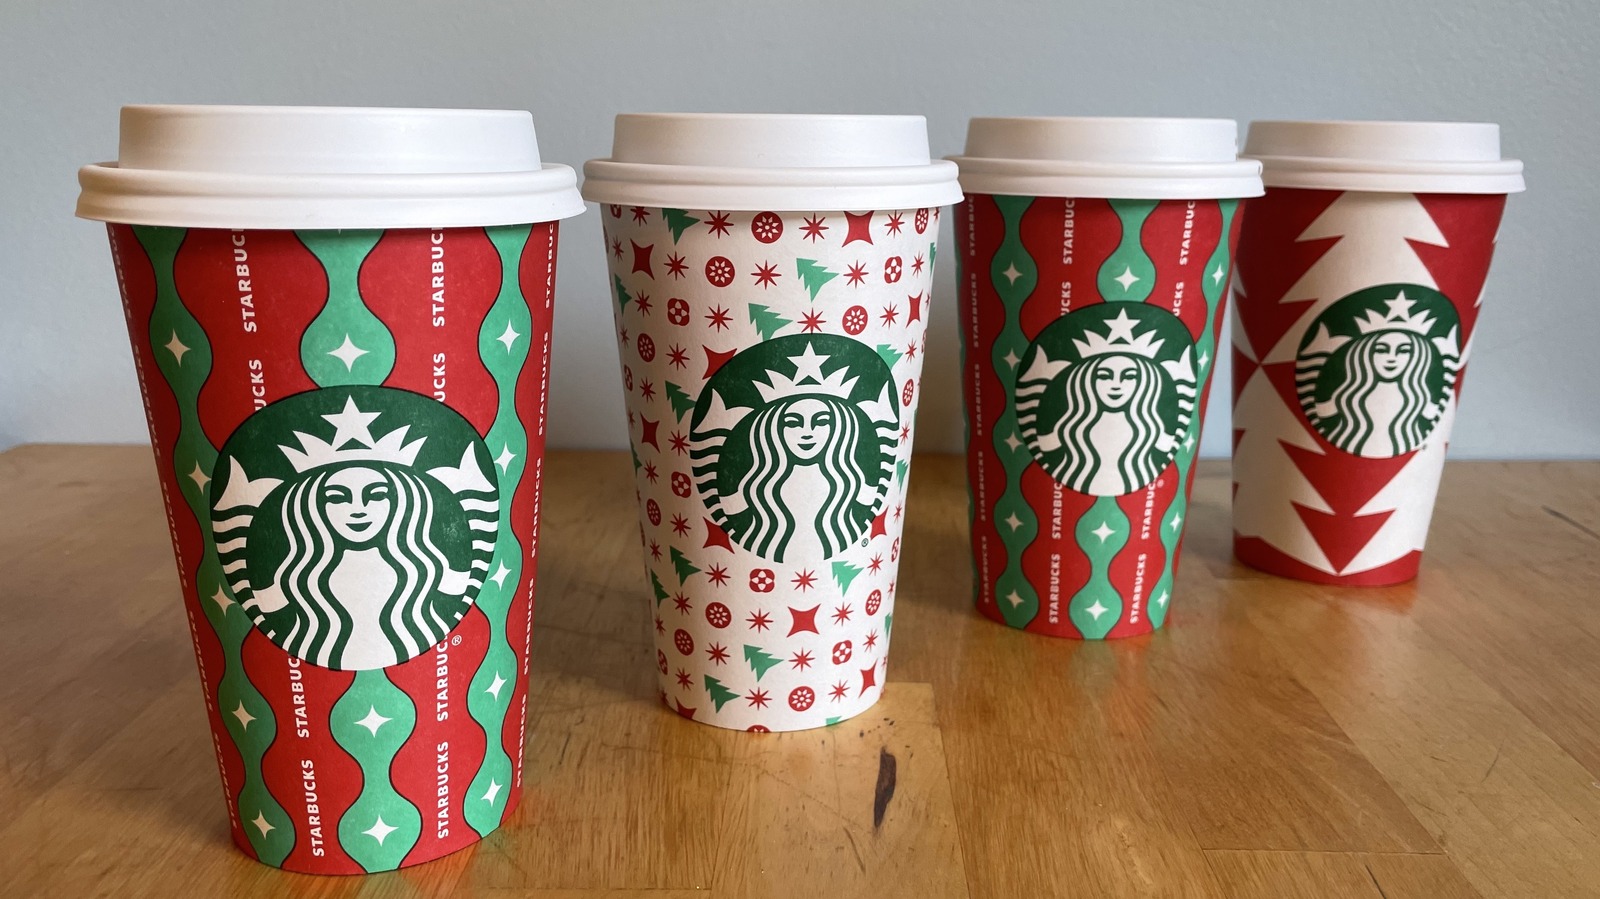 https://www.mashed.com/img/gallery/we-tried-the-new-starbucks-holiday-drinks-and-theyre-a-cup-of-holiday-cheer/l-intro-1667529608.jpg